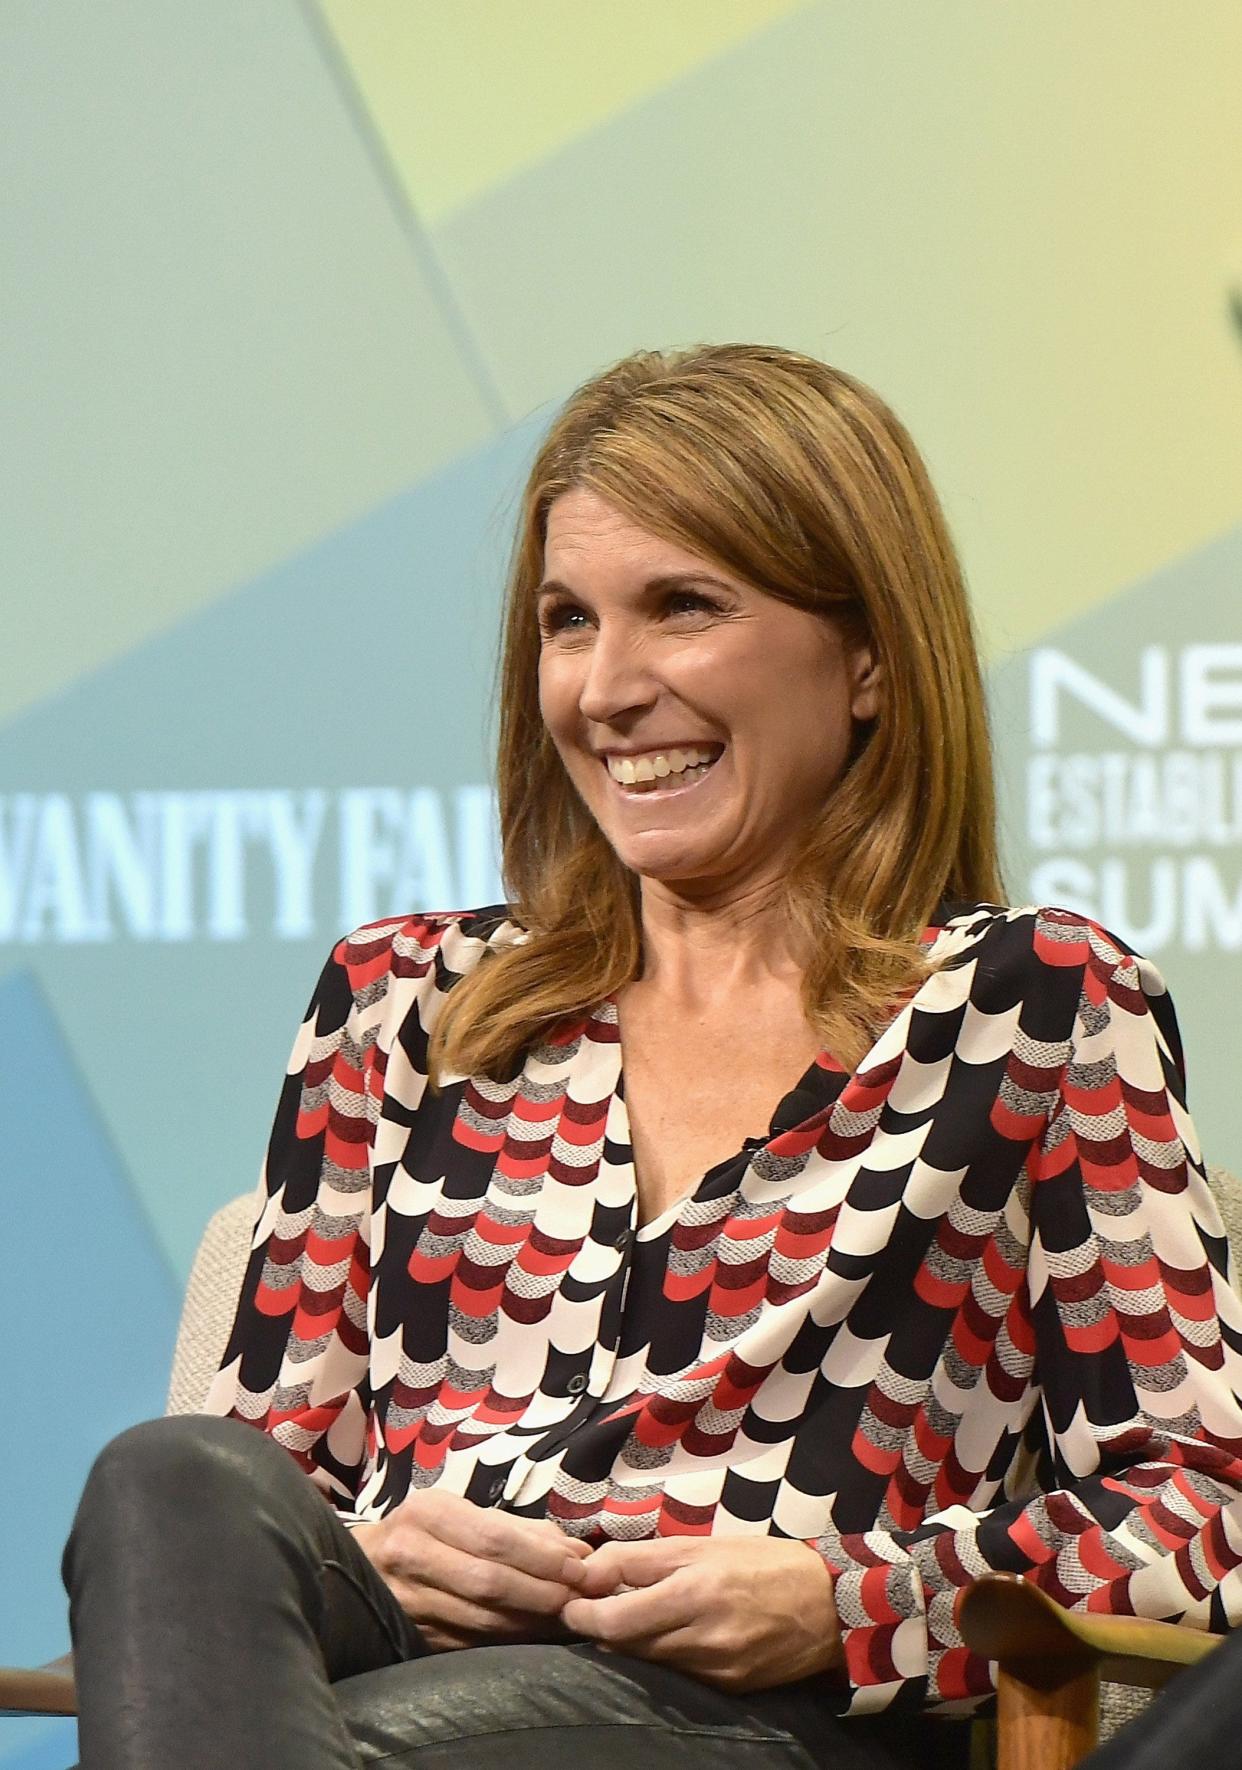 In this file photo, NBC News political analyst and host of MSNBC's Deadline:White House, Nicolle Wallace speaks onstage at Day 1 of the Vanity Fair New Establishment Summit 2018 at The Wallis Annenberg Center for the Performing Arts in 2018 in Beverly Hills, CA. MSNBC expanded Nicolle Wallace's program "Deadline White House" to two hours and moving Chuck Todd's "MTP Daily" to midday. (Matt Winkelmeyer/Getty Images/TNS)